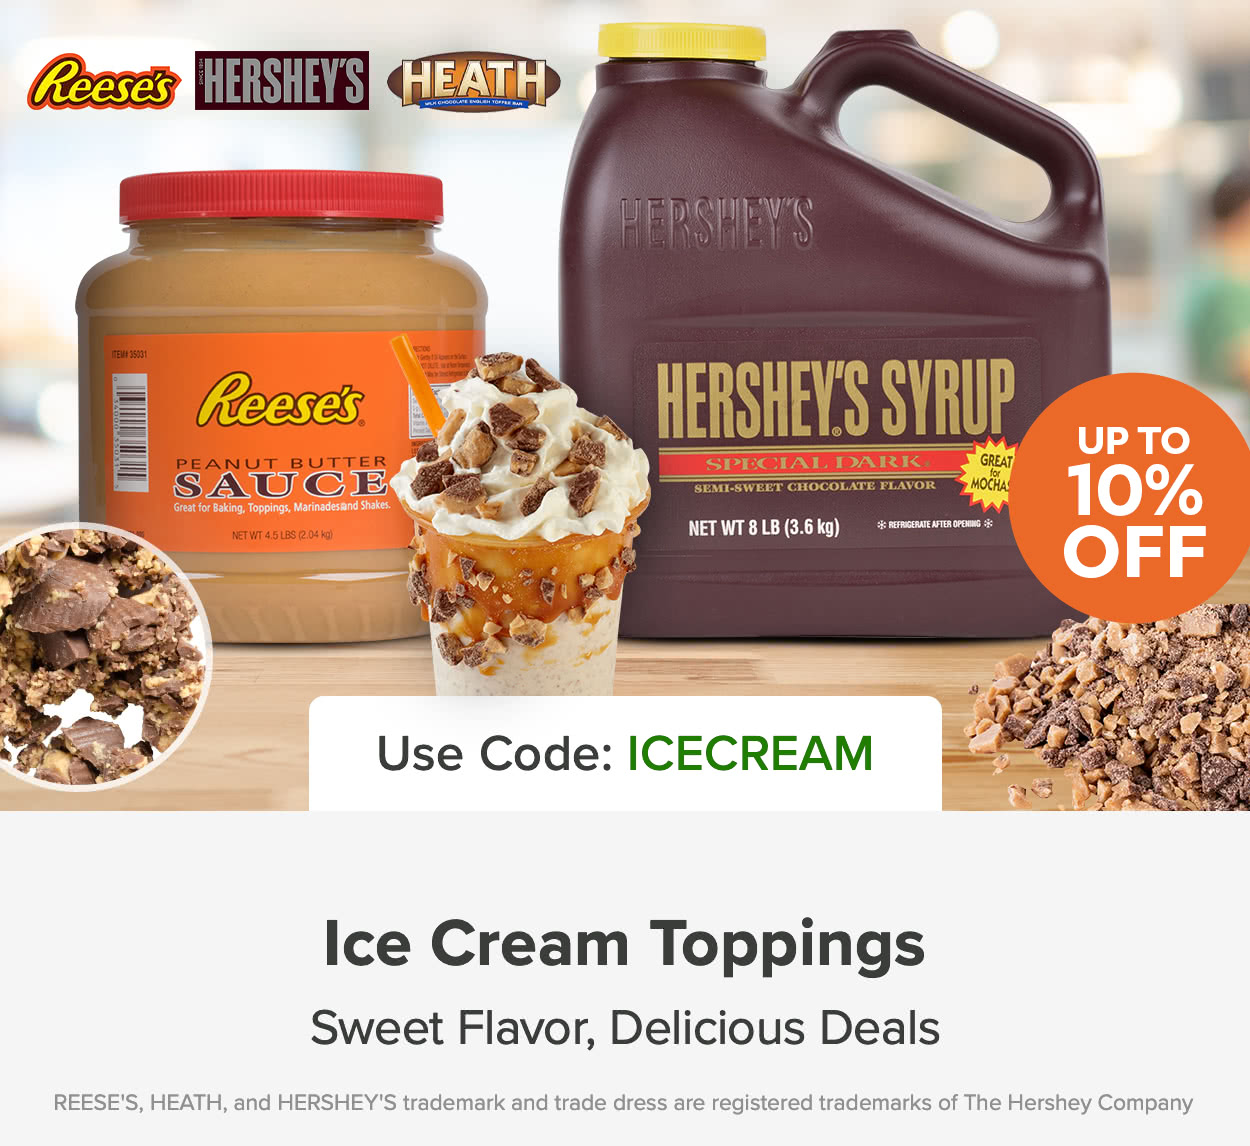 Save up to 10% on HERSHEY’S Ice Cream Toppings